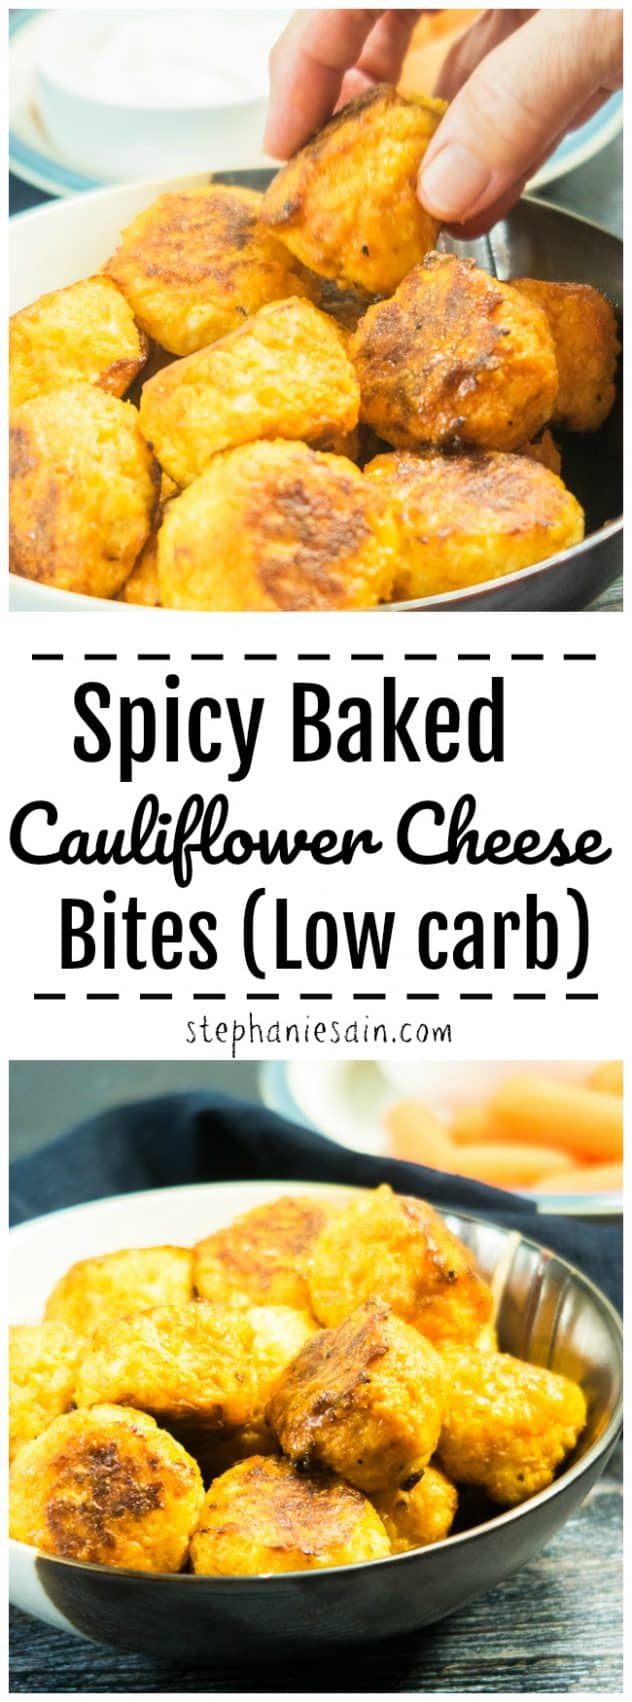 These Spicy Baked Cauliflower Cheese Bites are spicy, cheesy, flavorful little hand held bites perfect for an appetizer, game day, or even dinner with some sides. Gluten Free & Low Carb.